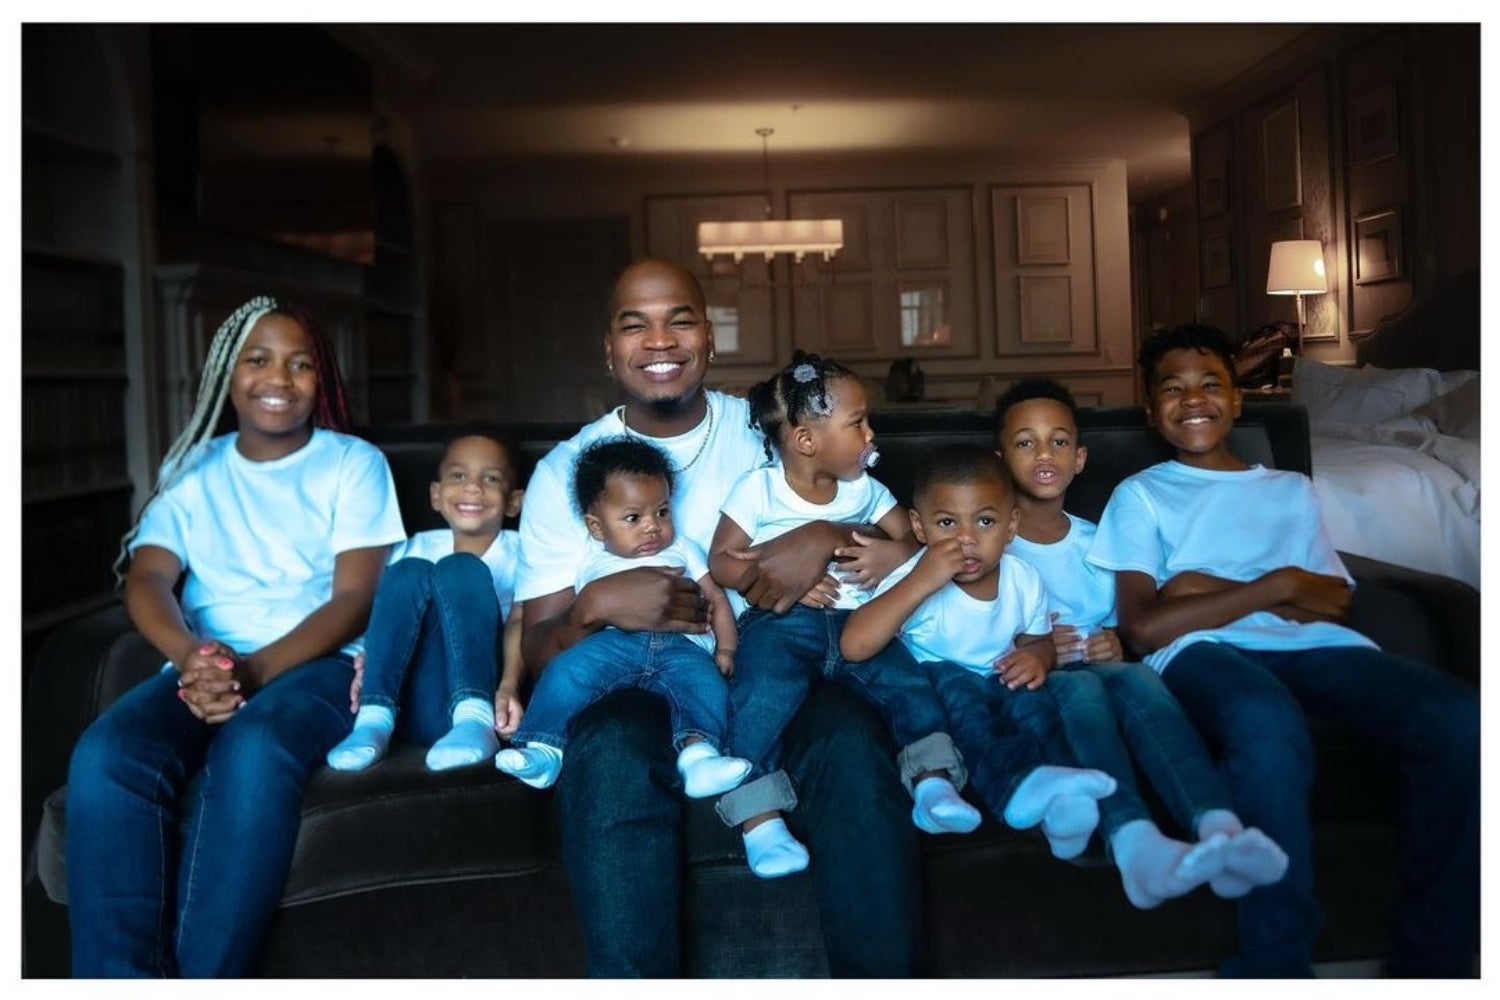 ‘They Are My Reason’: Ne-Yo Poses For Family Photo With All Seven Of His Children